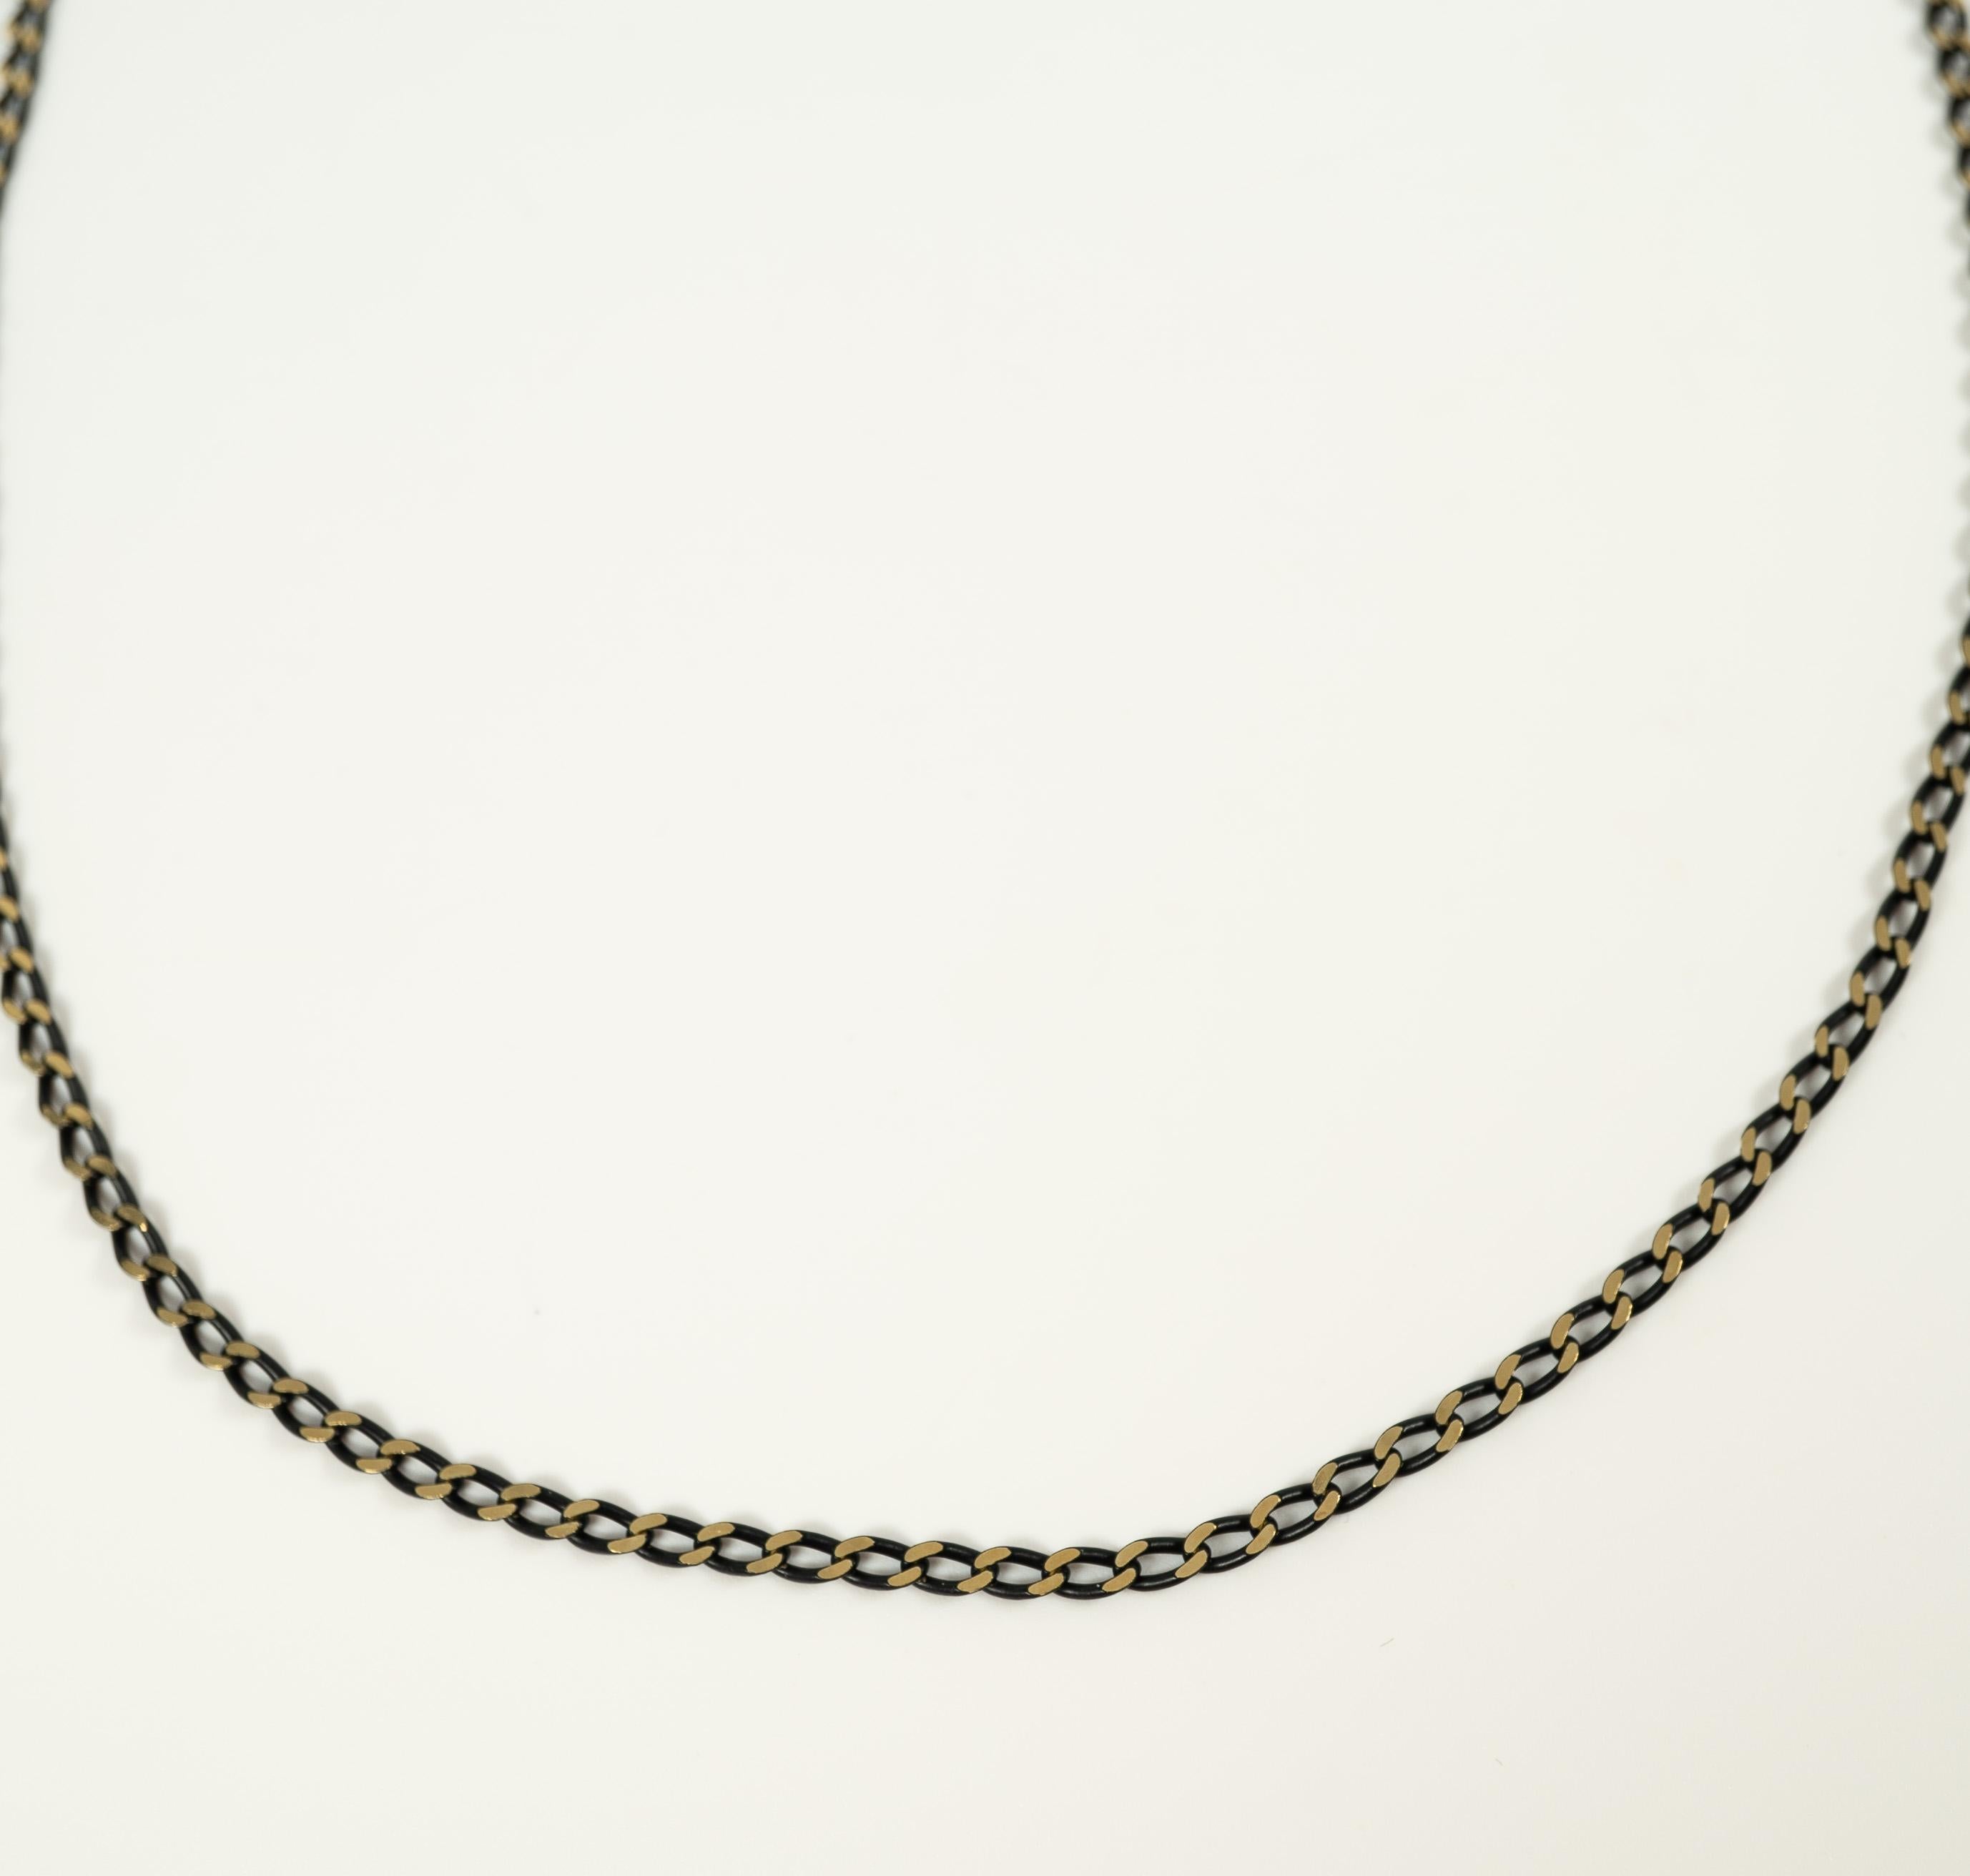 Composed of 18 karat yellow and black gold curb links, secured with a lobster clasp. 